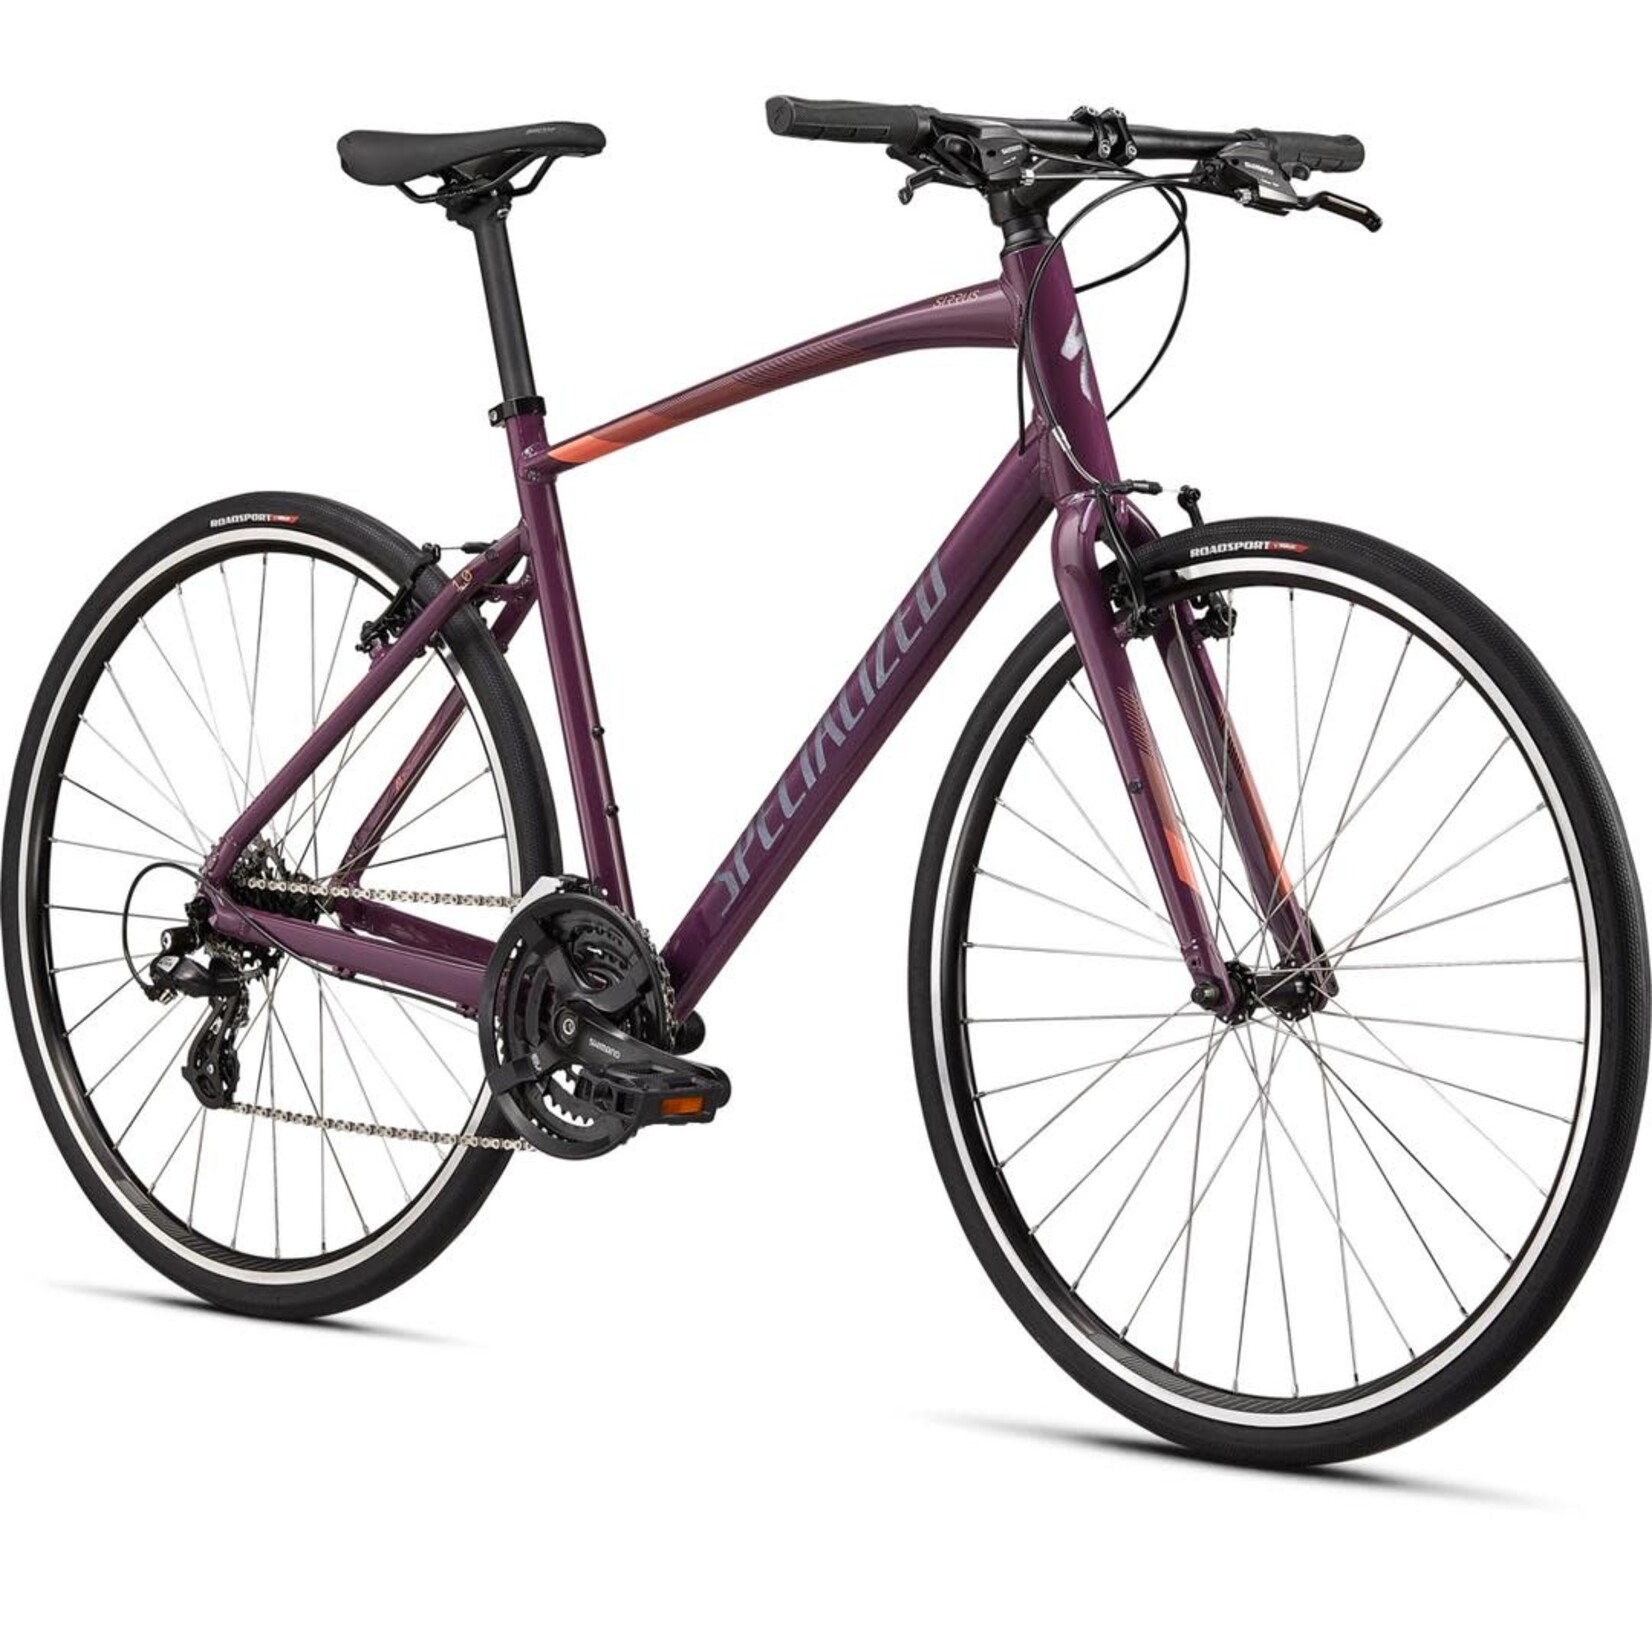 Specialized Sirrus 1.0 2021 in GLOSS CAST LILAC  VIVID CORAL  SATIN BLACK REFLECTIVE